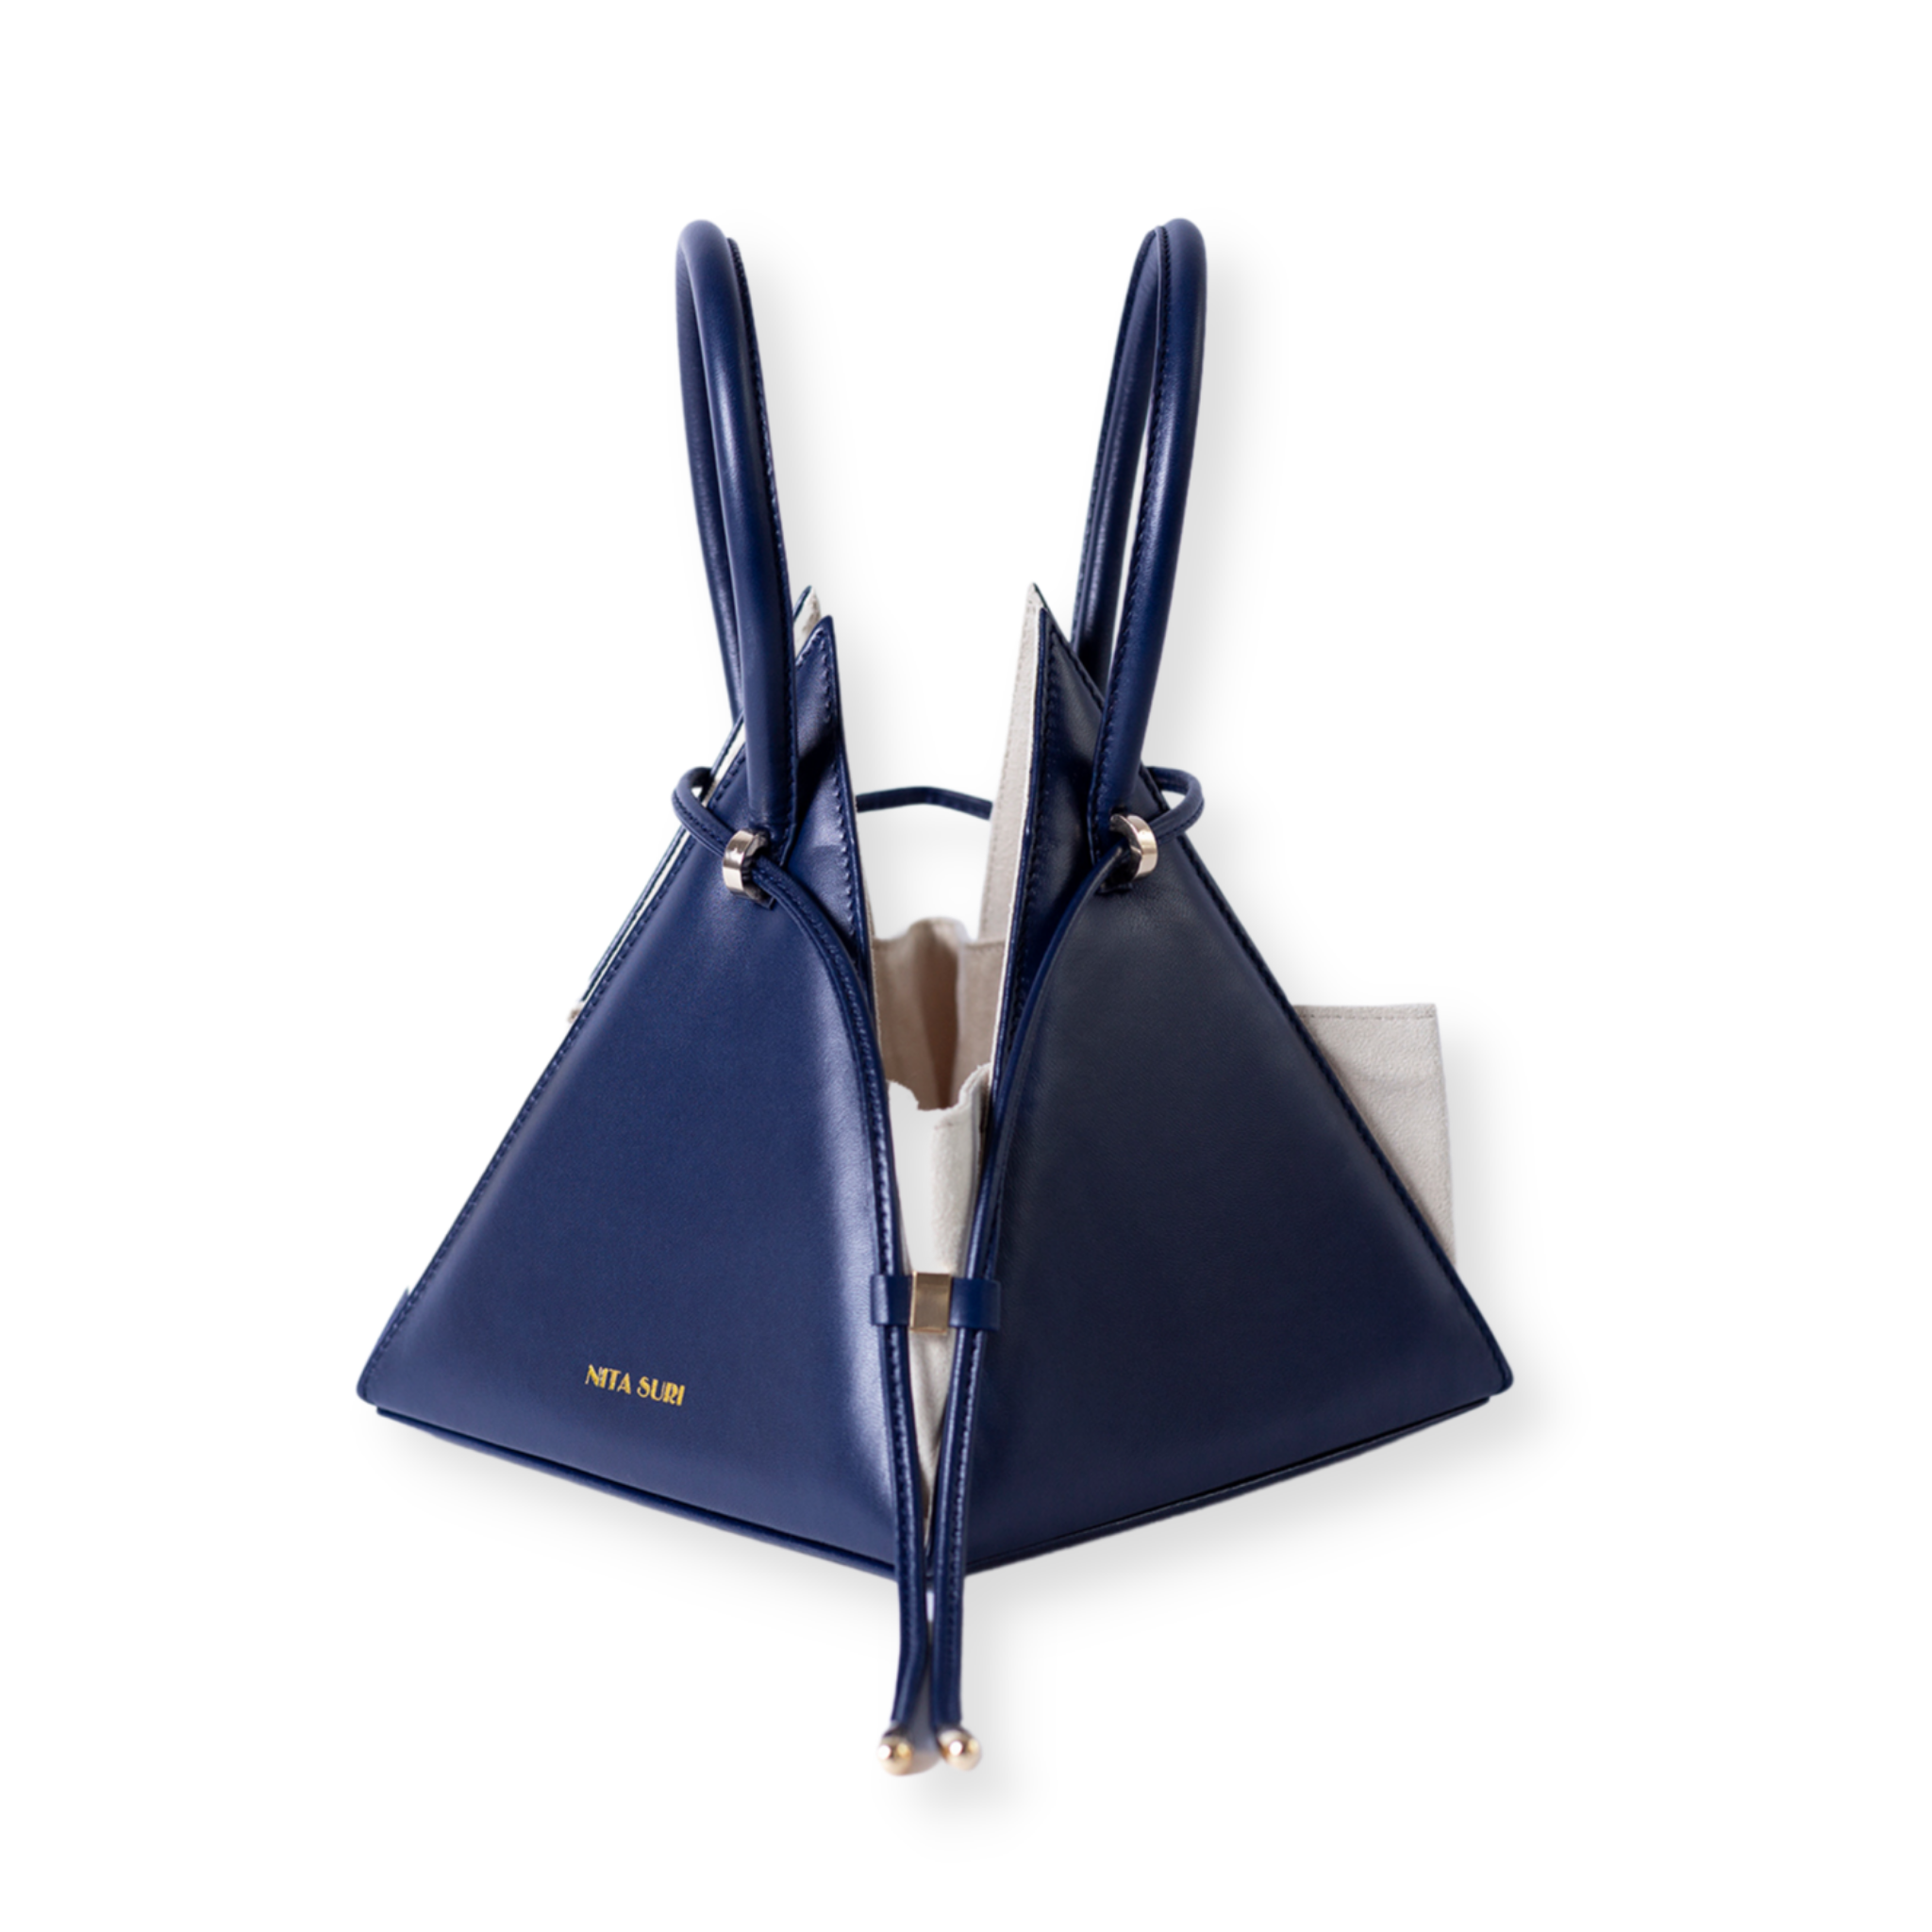 Buy now the Iconic Lia Handbag inspired by the geometric shapes of our designer's birth city Barcelona, and its world known artist, Antonio Gaudí, architect of the world wonder La Sagrada Familia. The Iconic Lia Ocean Blue Handbag has a unique and functional pyramidal design able to fit all your essentials. 